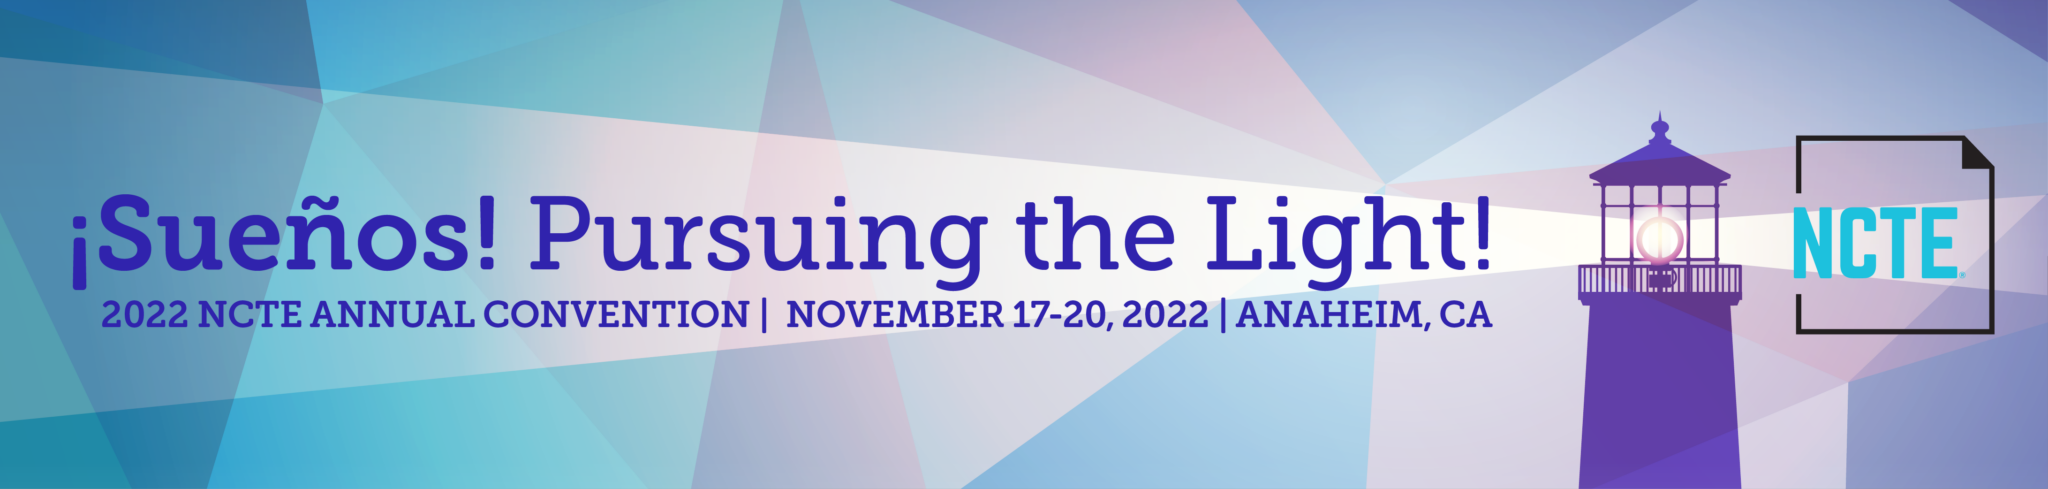 Link to the call for proposal for NCTE 2022